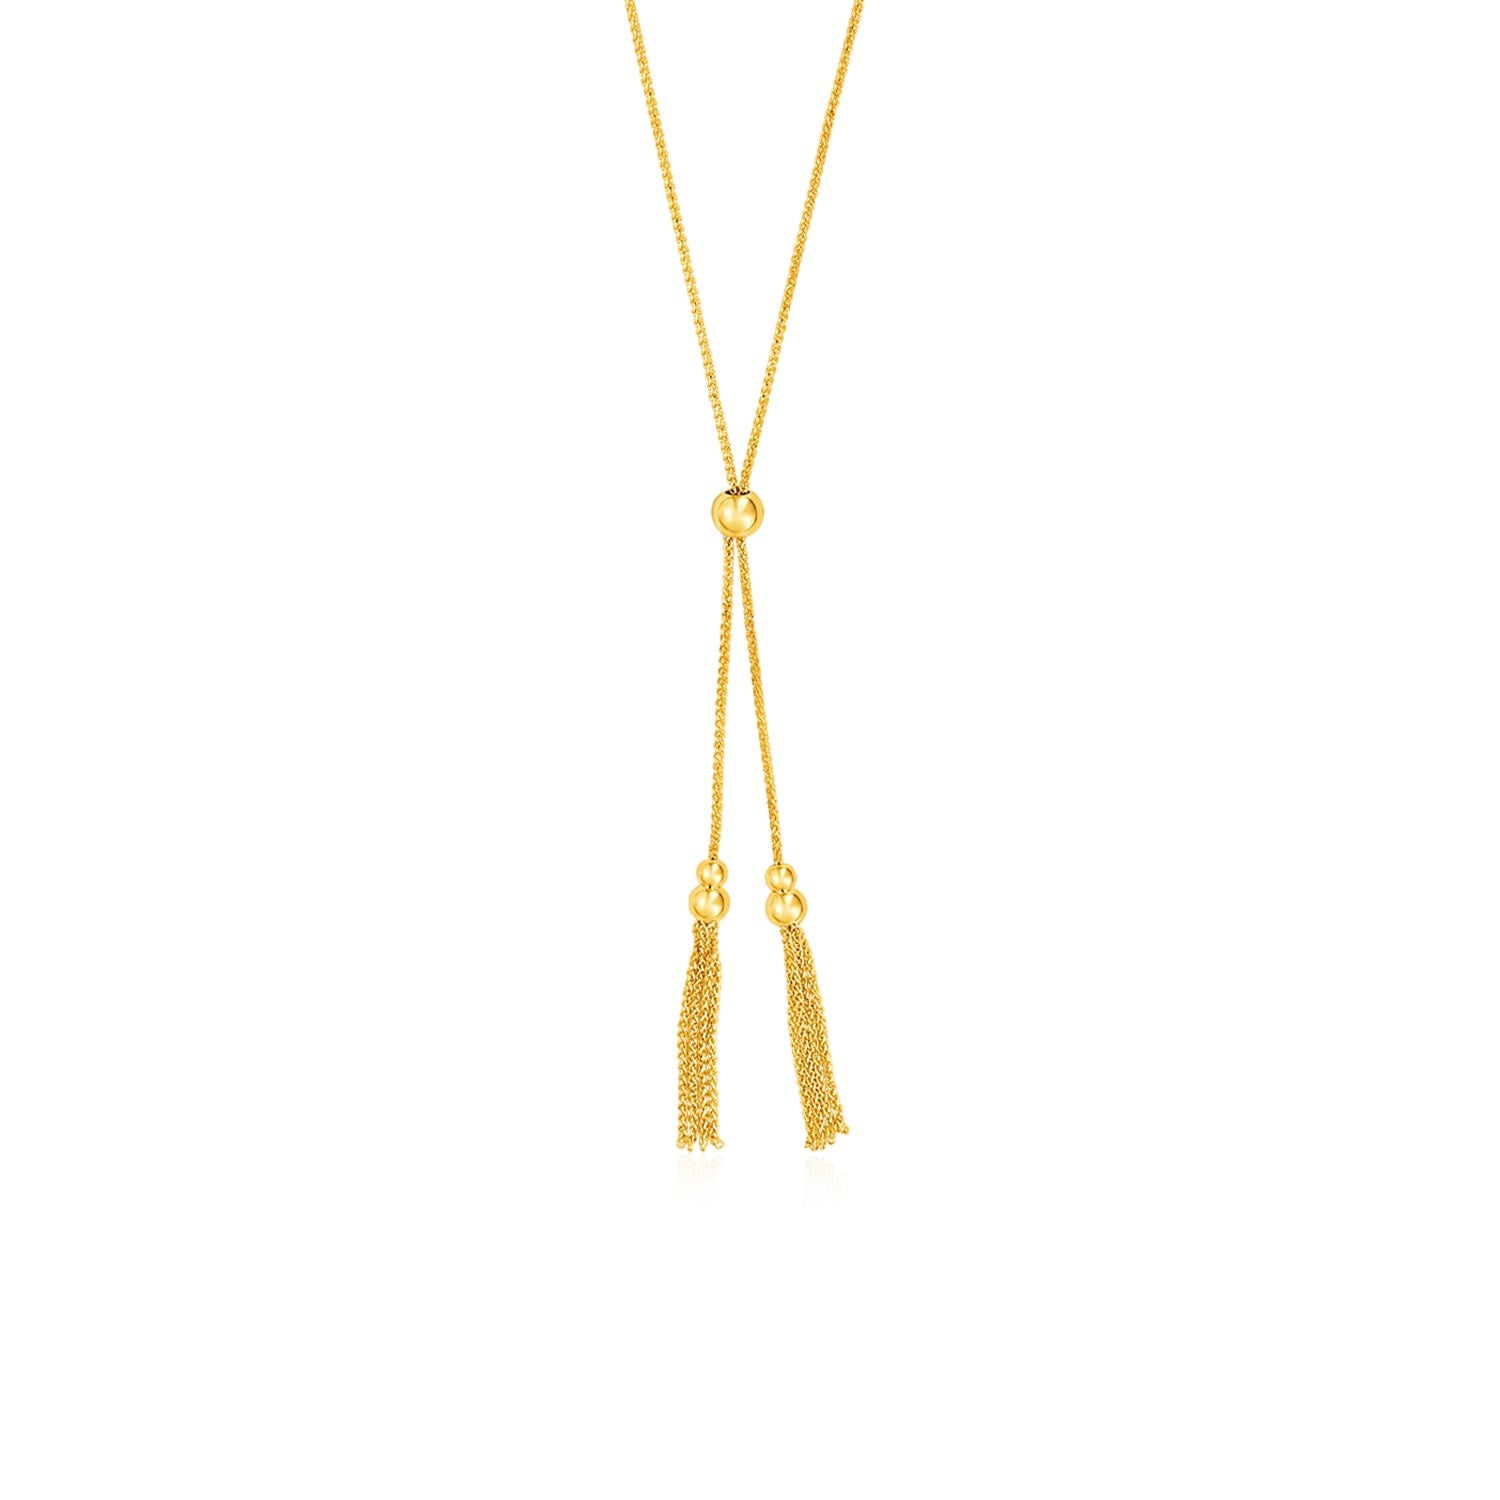 Adjustable Lariat Necklace with Chain Tassels in 14k Yellow Gold